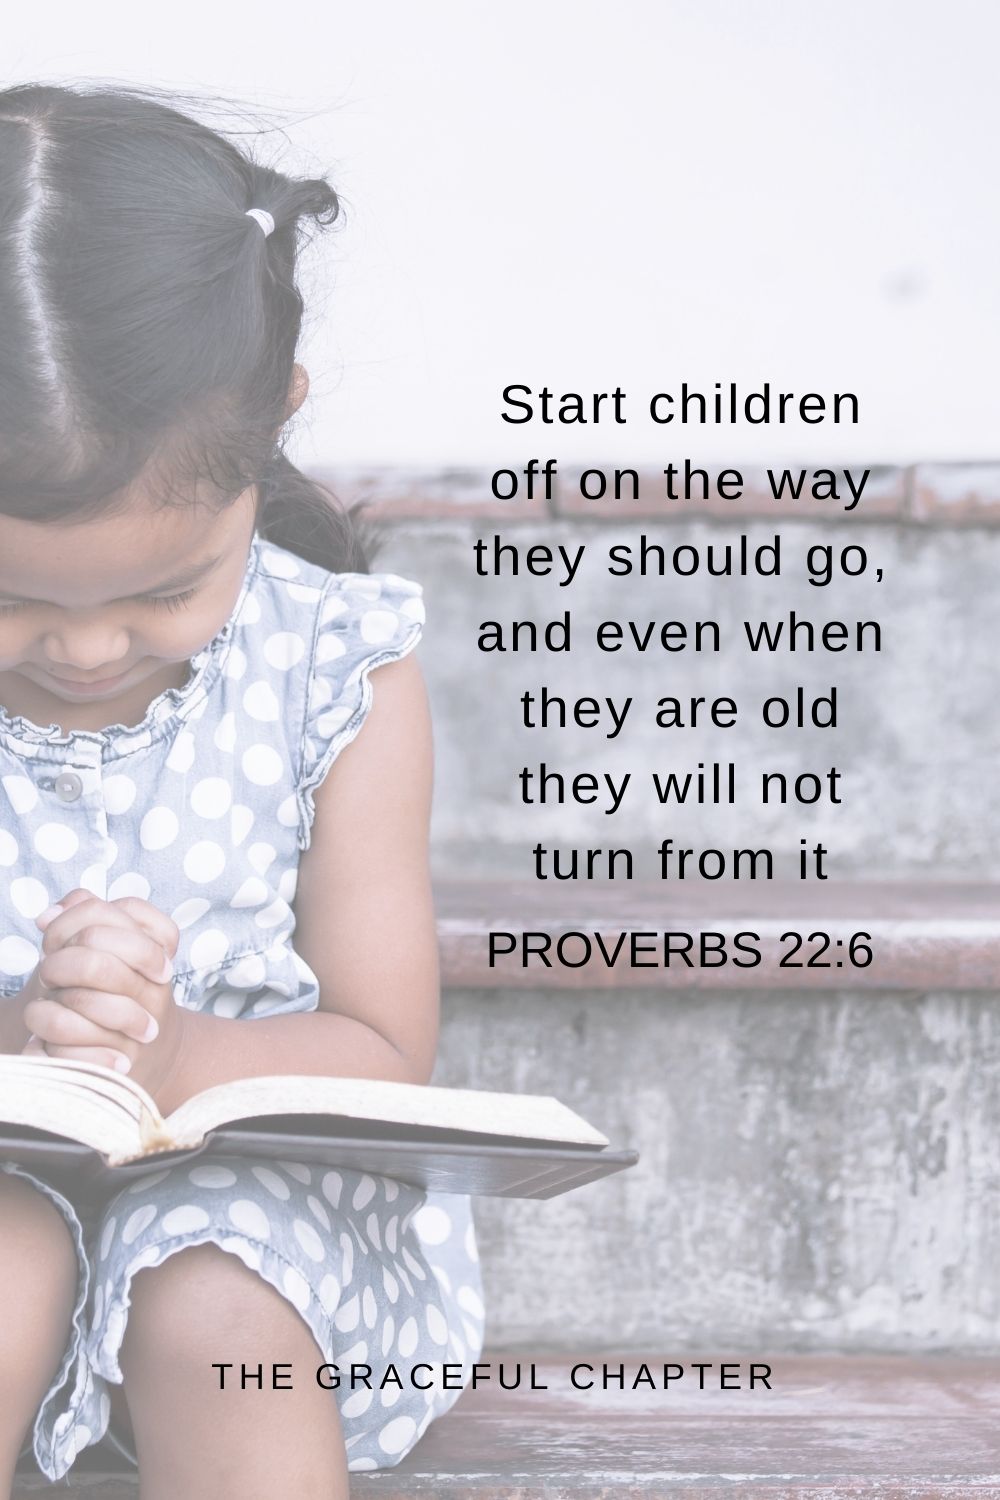 Start children off on the way they should go, and even when they are old they will not turn from it. Proverbs 22:6